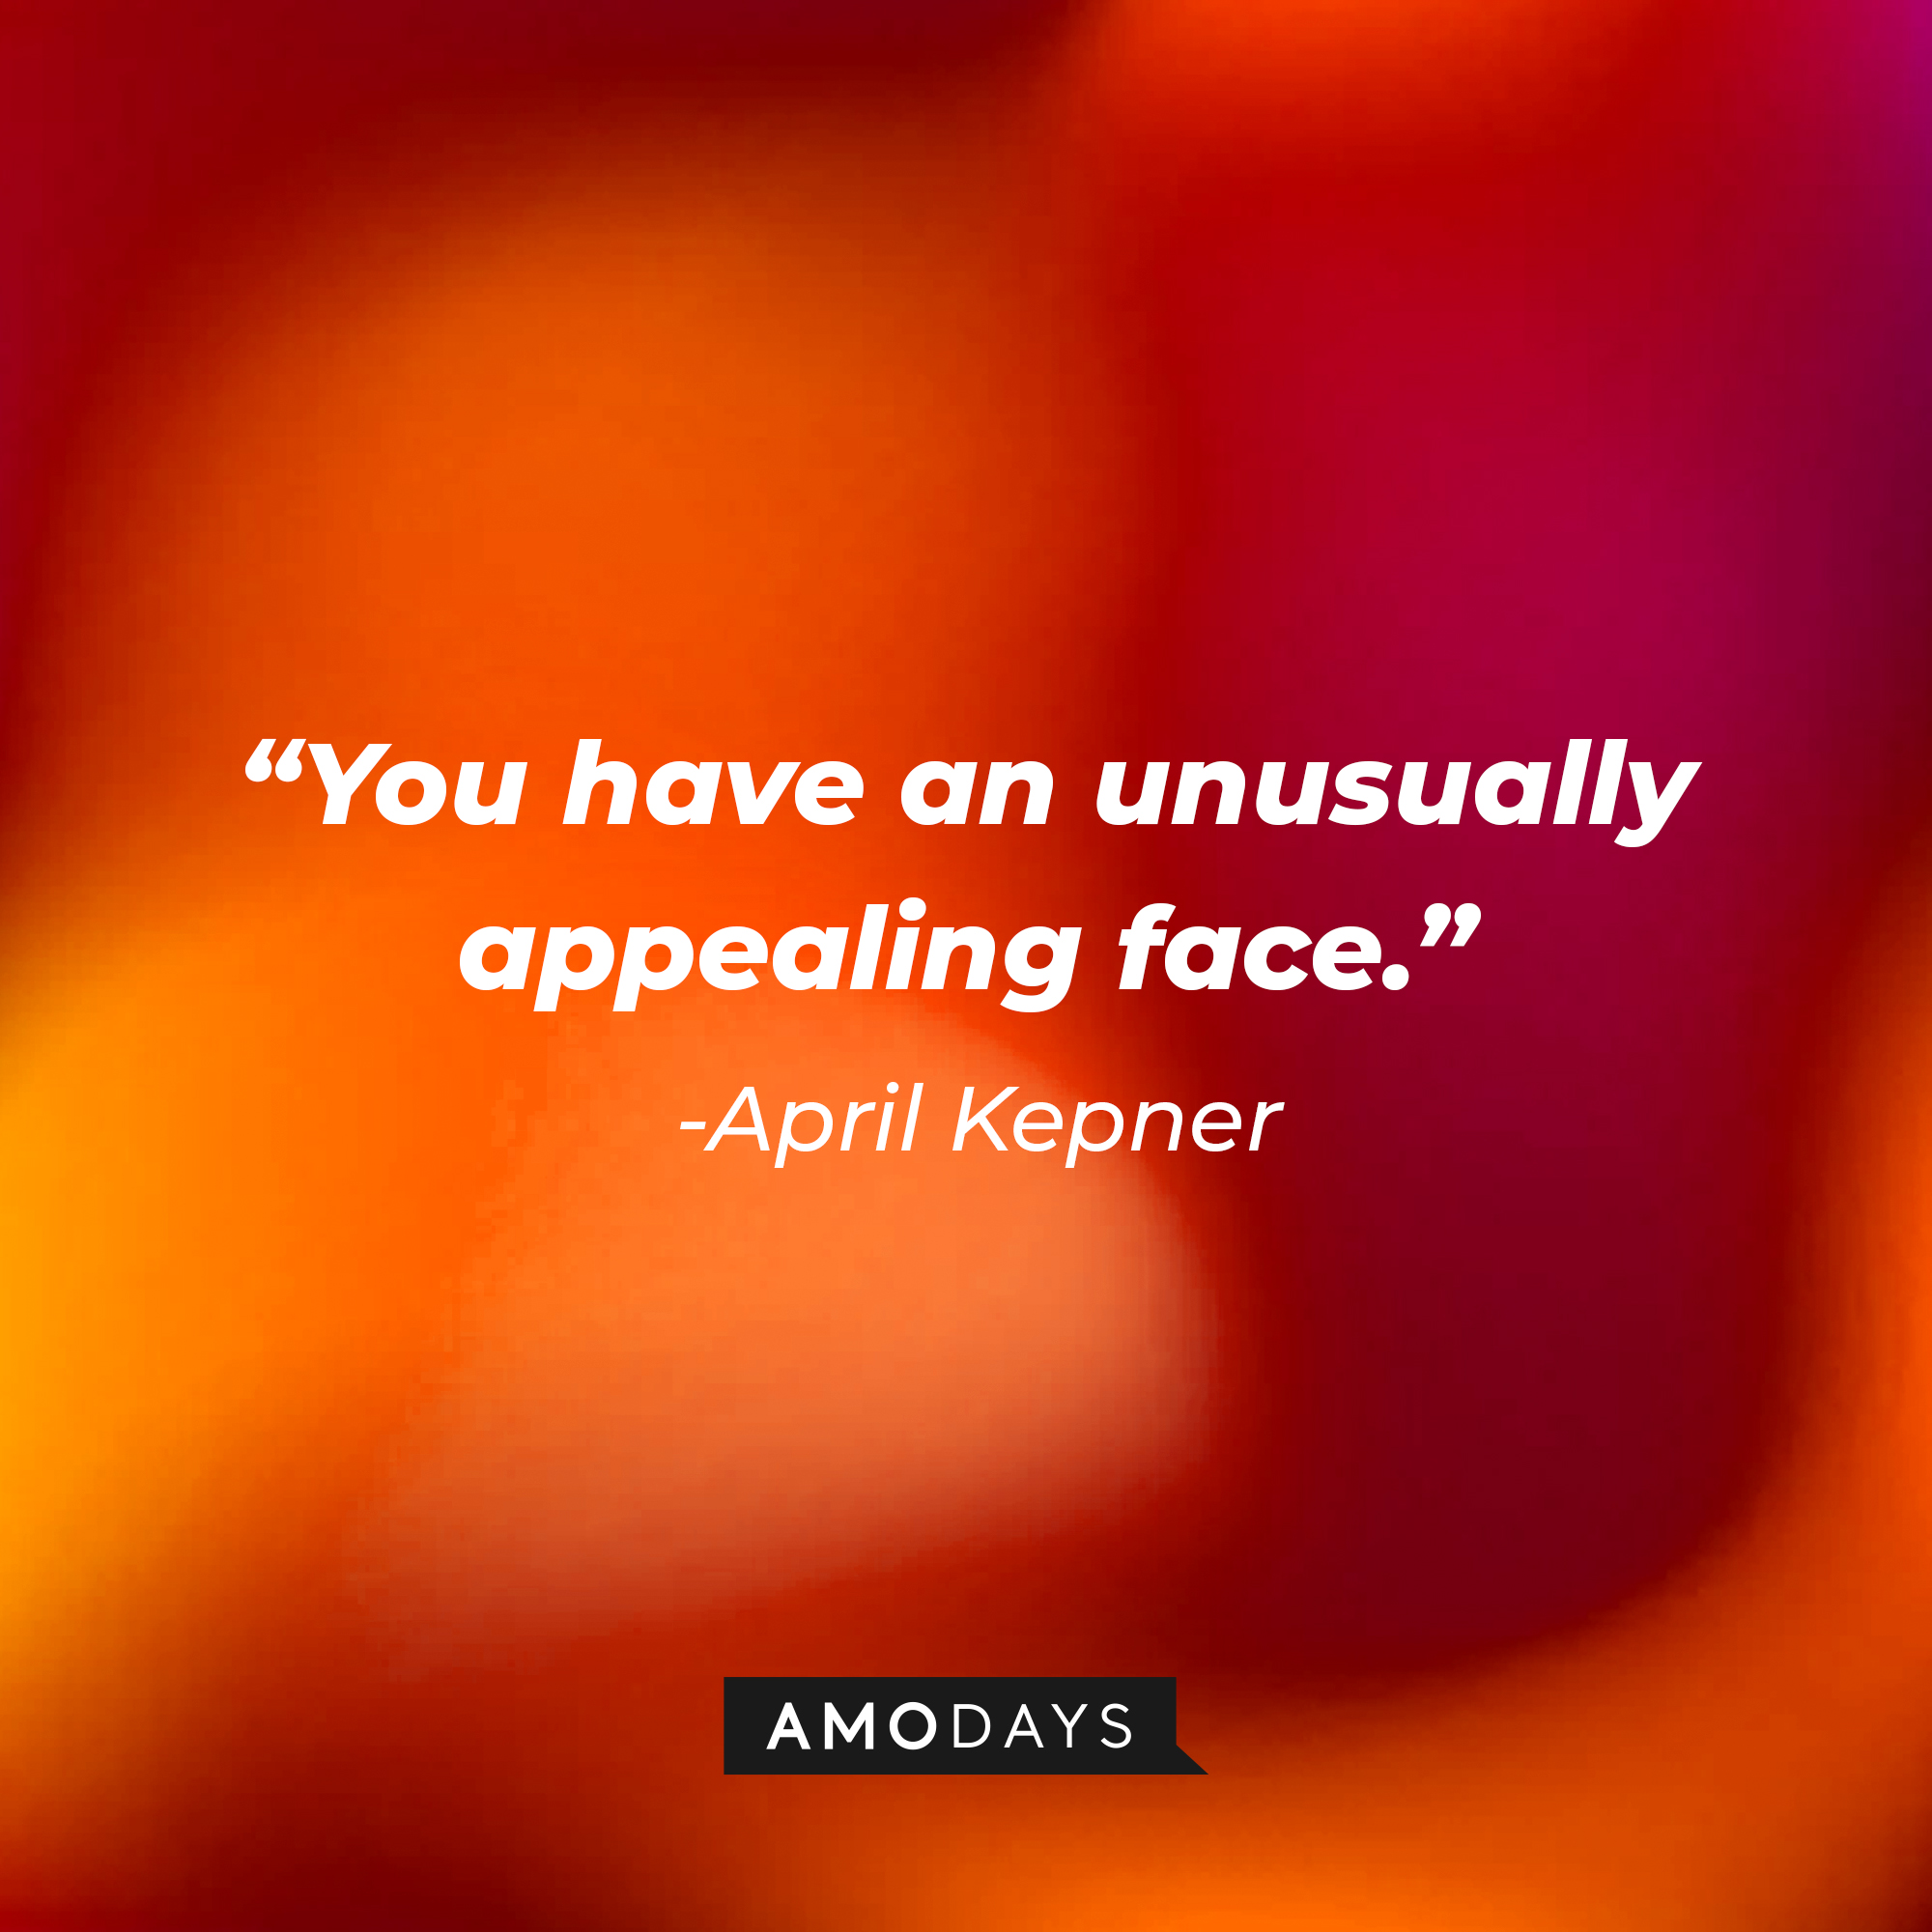 April Kepner's quote: "You have an unusually appealing face." | Source: AmoDays